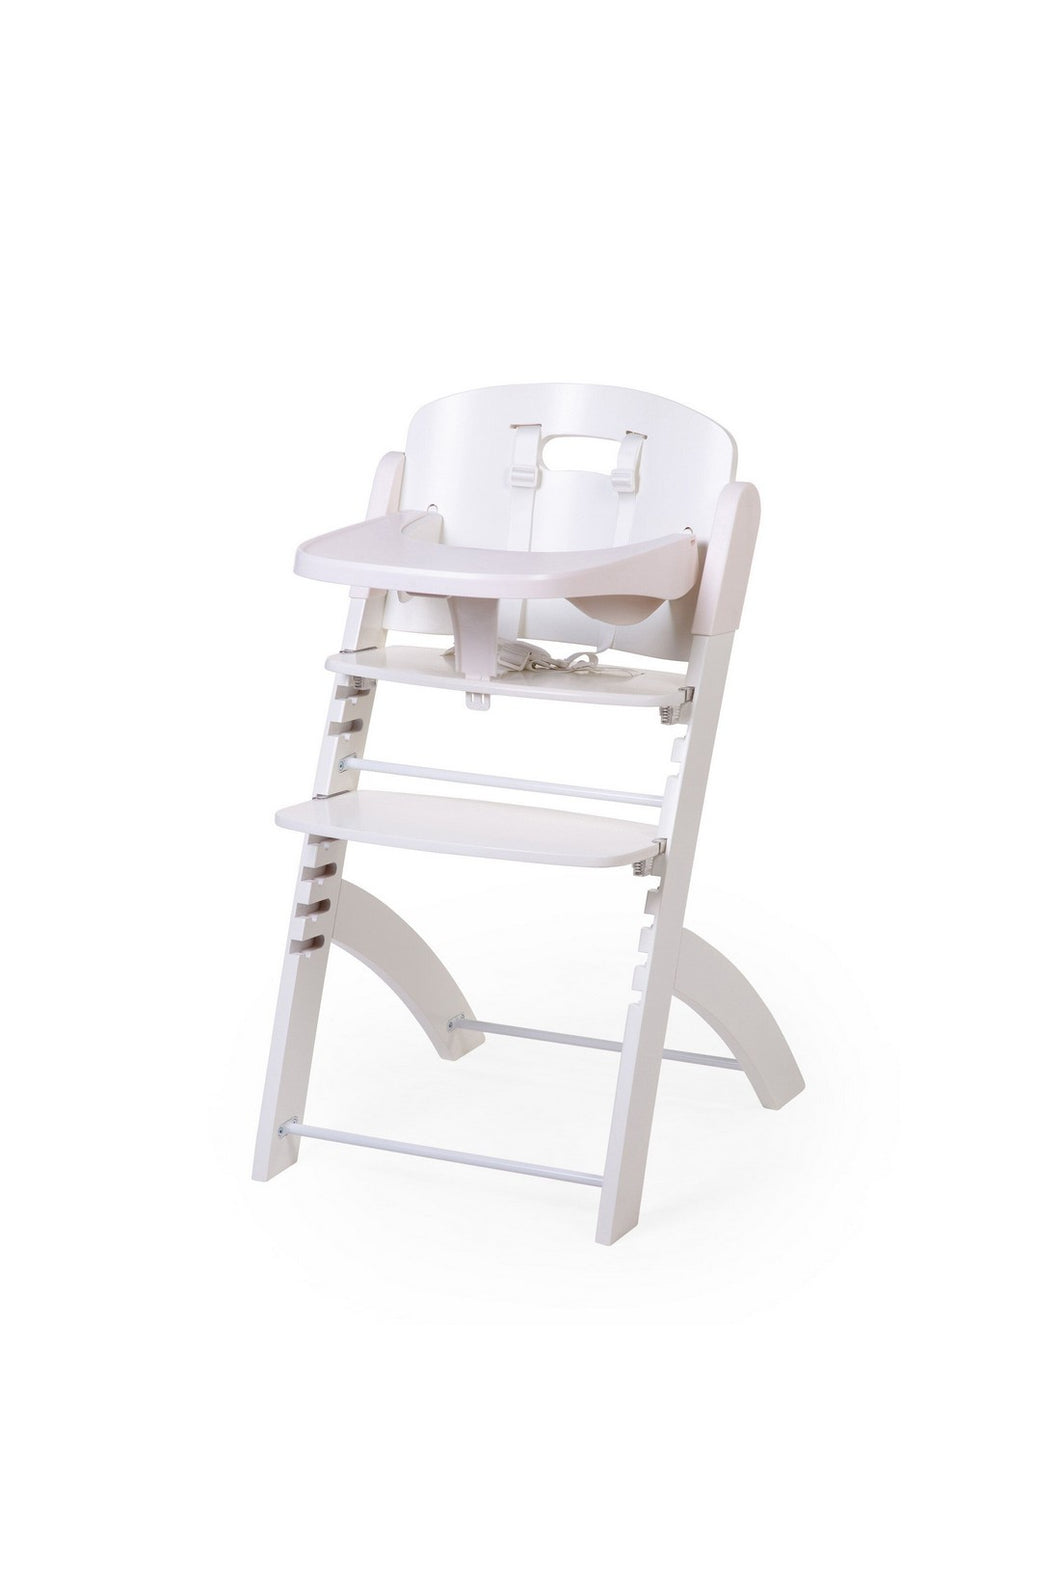 Childhome Evosit High Chair With Feeding Tray - White 1